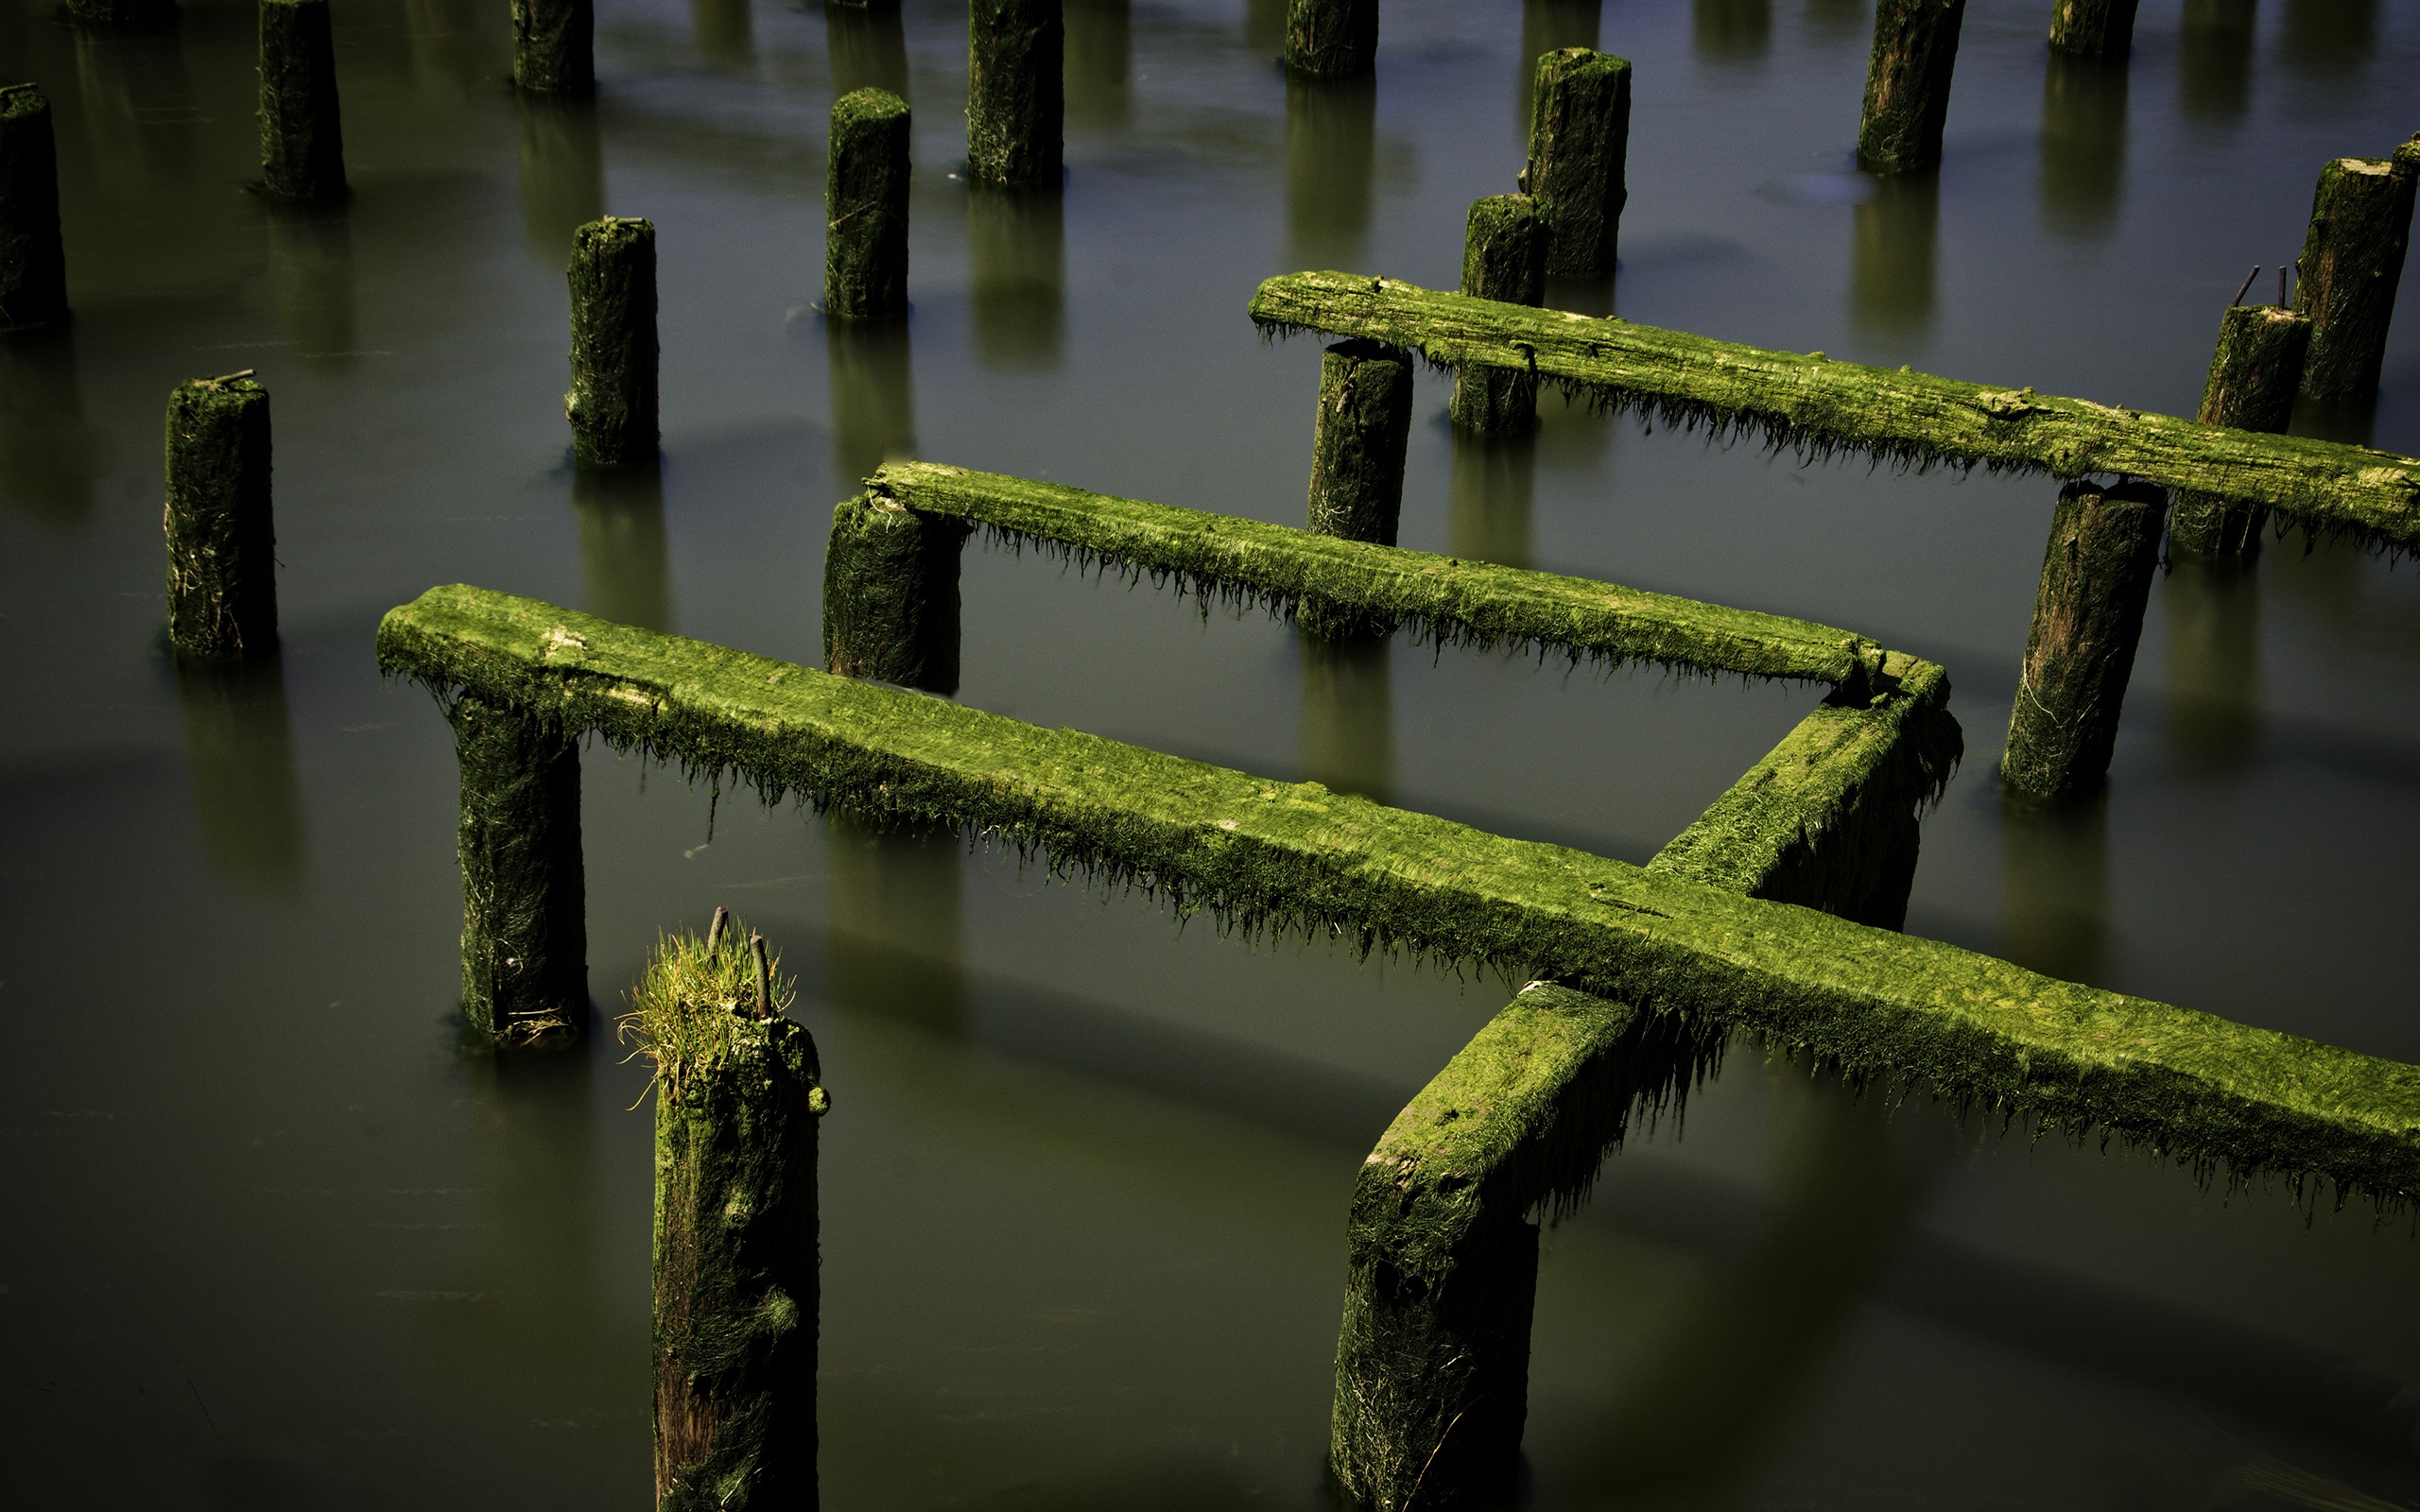 General 2560x1600 nature water long exposure wood moss shadow pier ruins photography